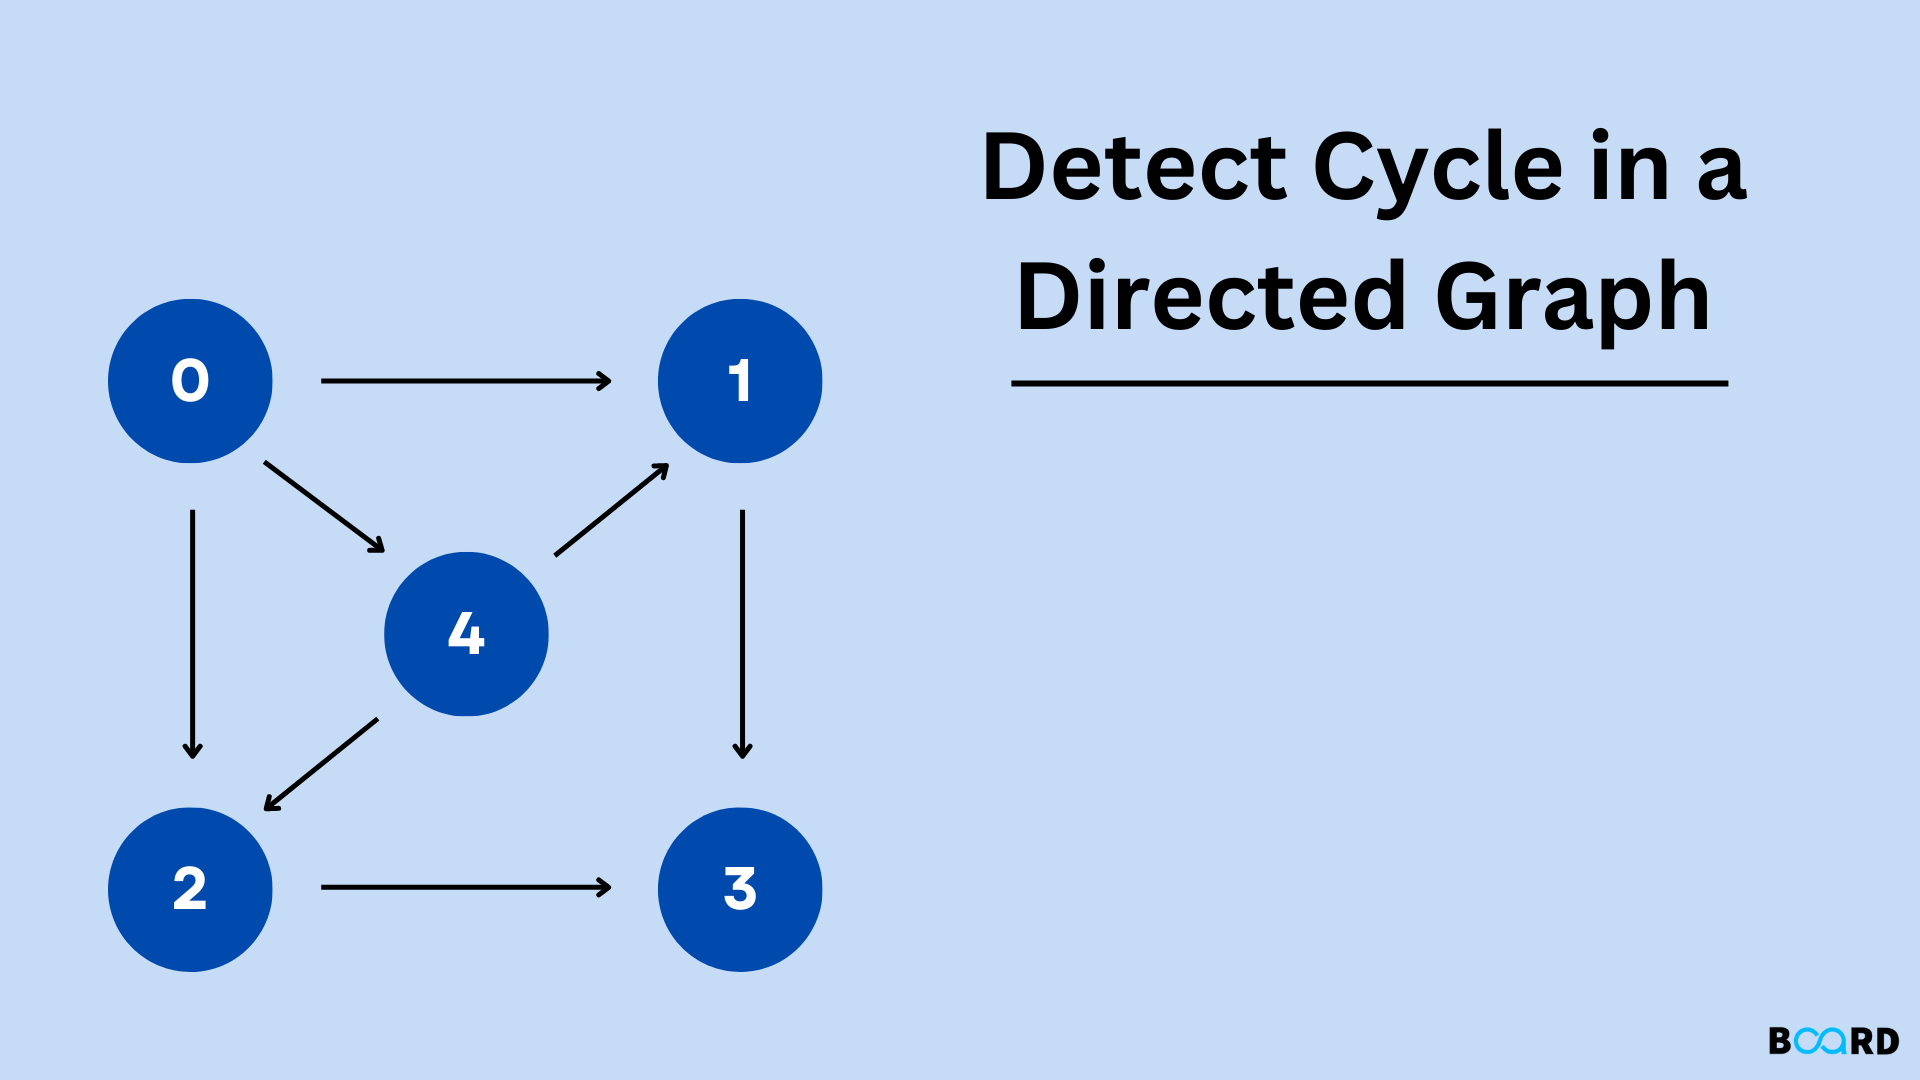 Detect Cycle in Direct Graph